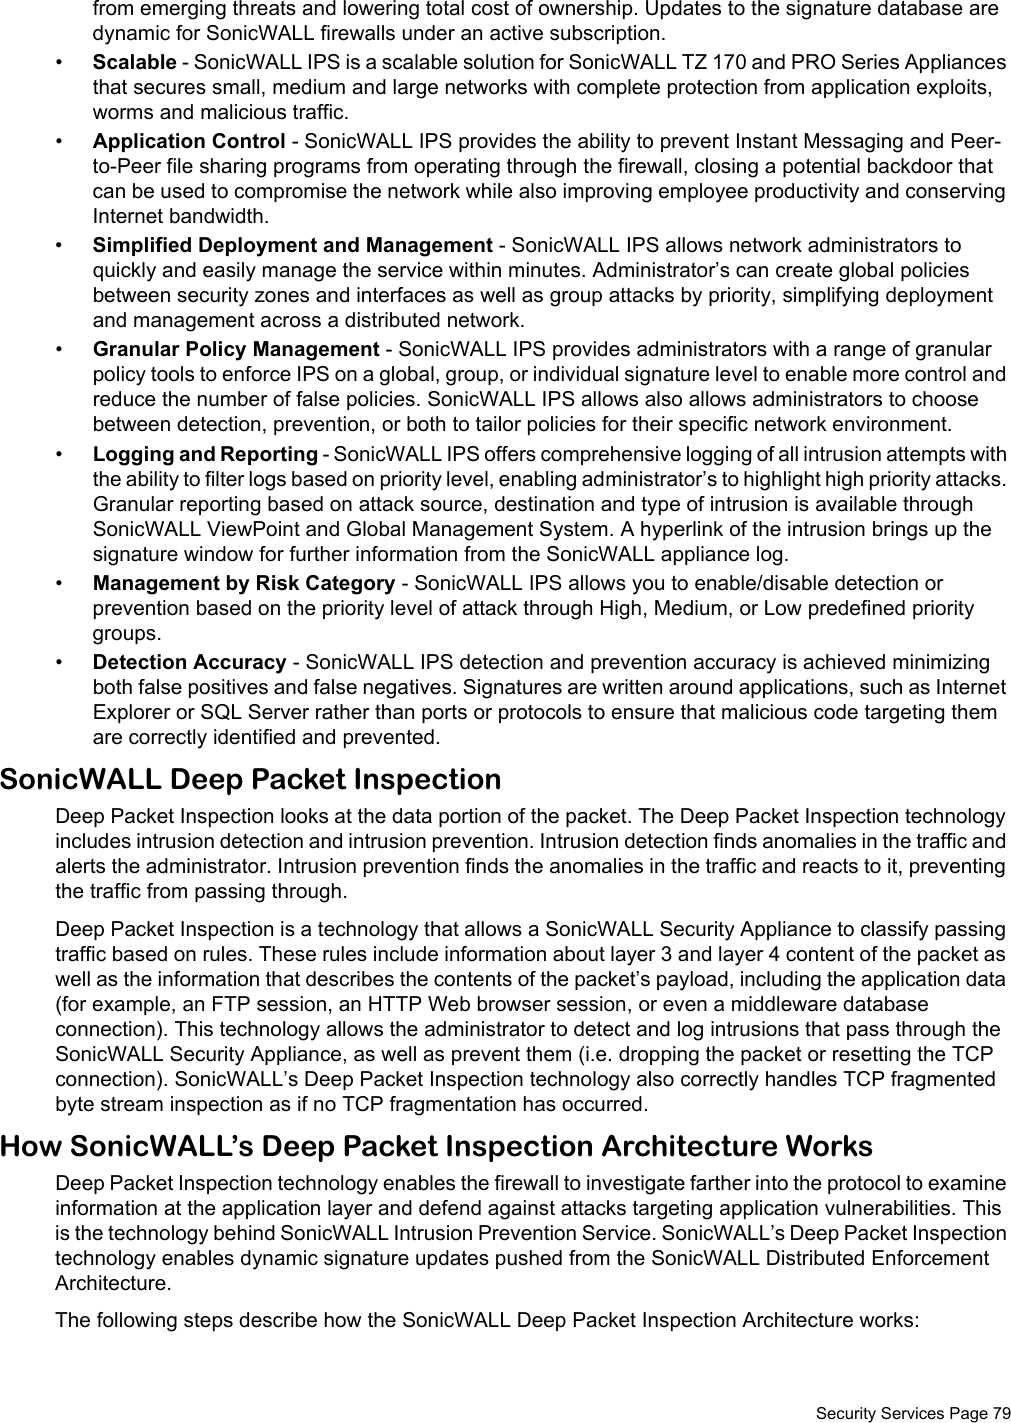  Security Services Page 79from emerging threats and lowering total cost of ownership. Updates to the signature database are dynamic for SonicWALL firewalls under an active subscription.•Scalable - SonicWALL IPS is a scalable solution for SonicWALL TZ 170 and PRO Series Appliances that secures small, medium and large networks with complete protection from application exploits, worms and malicious traffic.•Application Control - SonicWALL IPS provides the ability to prevent Instant Messaging and Peer-to-Peer file sharing programs from operating through the firewall, closing a potential backdoor that can be used to compromise the network while also improving employee productivity and conserving Internet bandwidth.•Simplified Deployment and Management - SonicWALL IPS allows network administrators to quickly and easily manage the service within minutes. Administrator’s can create global policies between security zones and interfaces as well as group attacks by priority, simplifying deployment and management across a distributed network.•Granular Policy Management - SonicWALL IPS provides administrators with a range of granular policy tools to enforce IPS on a global, group, or individual signature level to enable more control and reduce the number of false policies. SonicWALL IPS allows also allows administrators to choose between detection, prevention, or both to tailor policies for their specific network environment.•Logging and Reporting - SonicWALL IPS offers comprehensive logging of all intrusion attempts with the ability to filter logs based on priority level, enabling administrator’s to highlight high priority attacks. Granular reporting based on attack source, destination and type of intrusion is available through SonicWALL ViewPoint and Global Management System. A hyperlink of the intrusion brings up the signature window for further information from the SonicWALL appliance log.•Management by Risk Category - SonicWALL IPS allows you to enable/disable detection or prevention based on the priority level of attack through High, Medium, or Low predefined priority groups.•Detection Accuracy - SonicWALL IPS detection and prevention accuracy is achieved minimizing both false positives and false negatives. Signatures are written around applications, such as Internet Explorer or SQL Server rather than ports or protocols to ensure that malicious code targeting them are correctly identified and prevented.SonicWALL Deep Packet InspectionDeep Packet Inspection looks at the data portion of the packet. The Deep Packet Inspection technology includes intrusion detection and intrusion prevention. Intrusion detection finds anomalies in the traffic and alerts the administrator. Intrusion prevention finds the anomalies in the traffic and reacts to it, preventing the traffic from passing through.Deep Packet Inspection is a technology that allows a SonicWALL Security Appliance to classify passing traffic based on rules. These rules include information about layer 3 and layer 4 content of the packet as well as the information that describes the contents of the packet’s payload, including the application data (for example, an FTP session, an HTTP Web browser session, or even a middleware database connection). This technology allows the administrator to detect and log intrusions that pass through the SonicWALL Security Appliance, as well as prevent them (i.e. dropping the packet or resetting the TCP connection). SonicWALL’s Deep Packet Inspection technology also correctly handles TCP fragmented byte stream inspection as if no TCP fragmentation has occurred.How SonicWALL’s Deep Packet Inspection Architecture WorksDeep Packet Inspection technology enables the firewall to investigate farther into the protocol to examine information at the application layer and defend against attacks targeting application vulnerabilities. This is the technology behind SonicWALL Intrusion Prevention Service. SonicWALL’s Deep Packet Inspection technology enables dynamic signature updates pushed from the SonicWALL Distributed Enforcement Architecture.The following steps describe how the SonicWALL Deep Packet Inspection Architecture works: